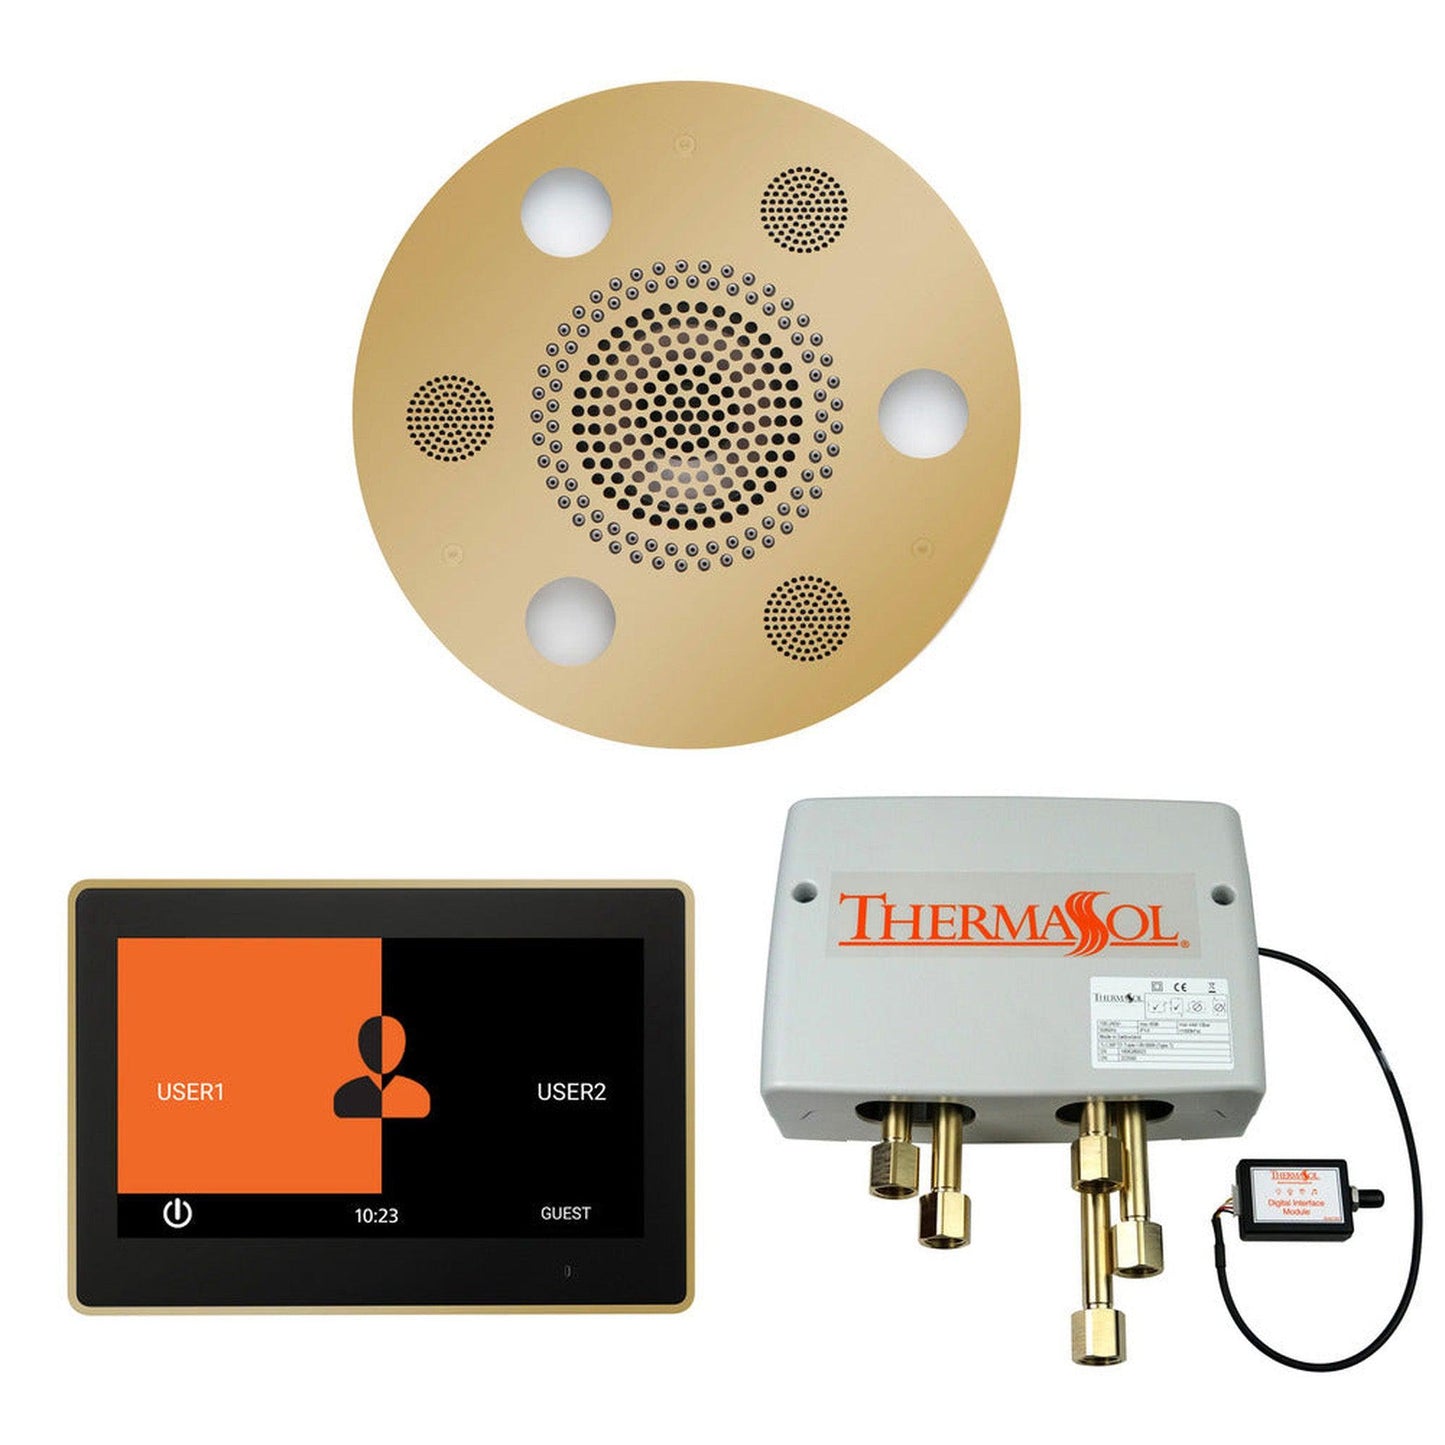 ThermaSol The Wellness Polished Brass Finish Serenity Advancedd Round Shower Package with 10" ThermaTouch